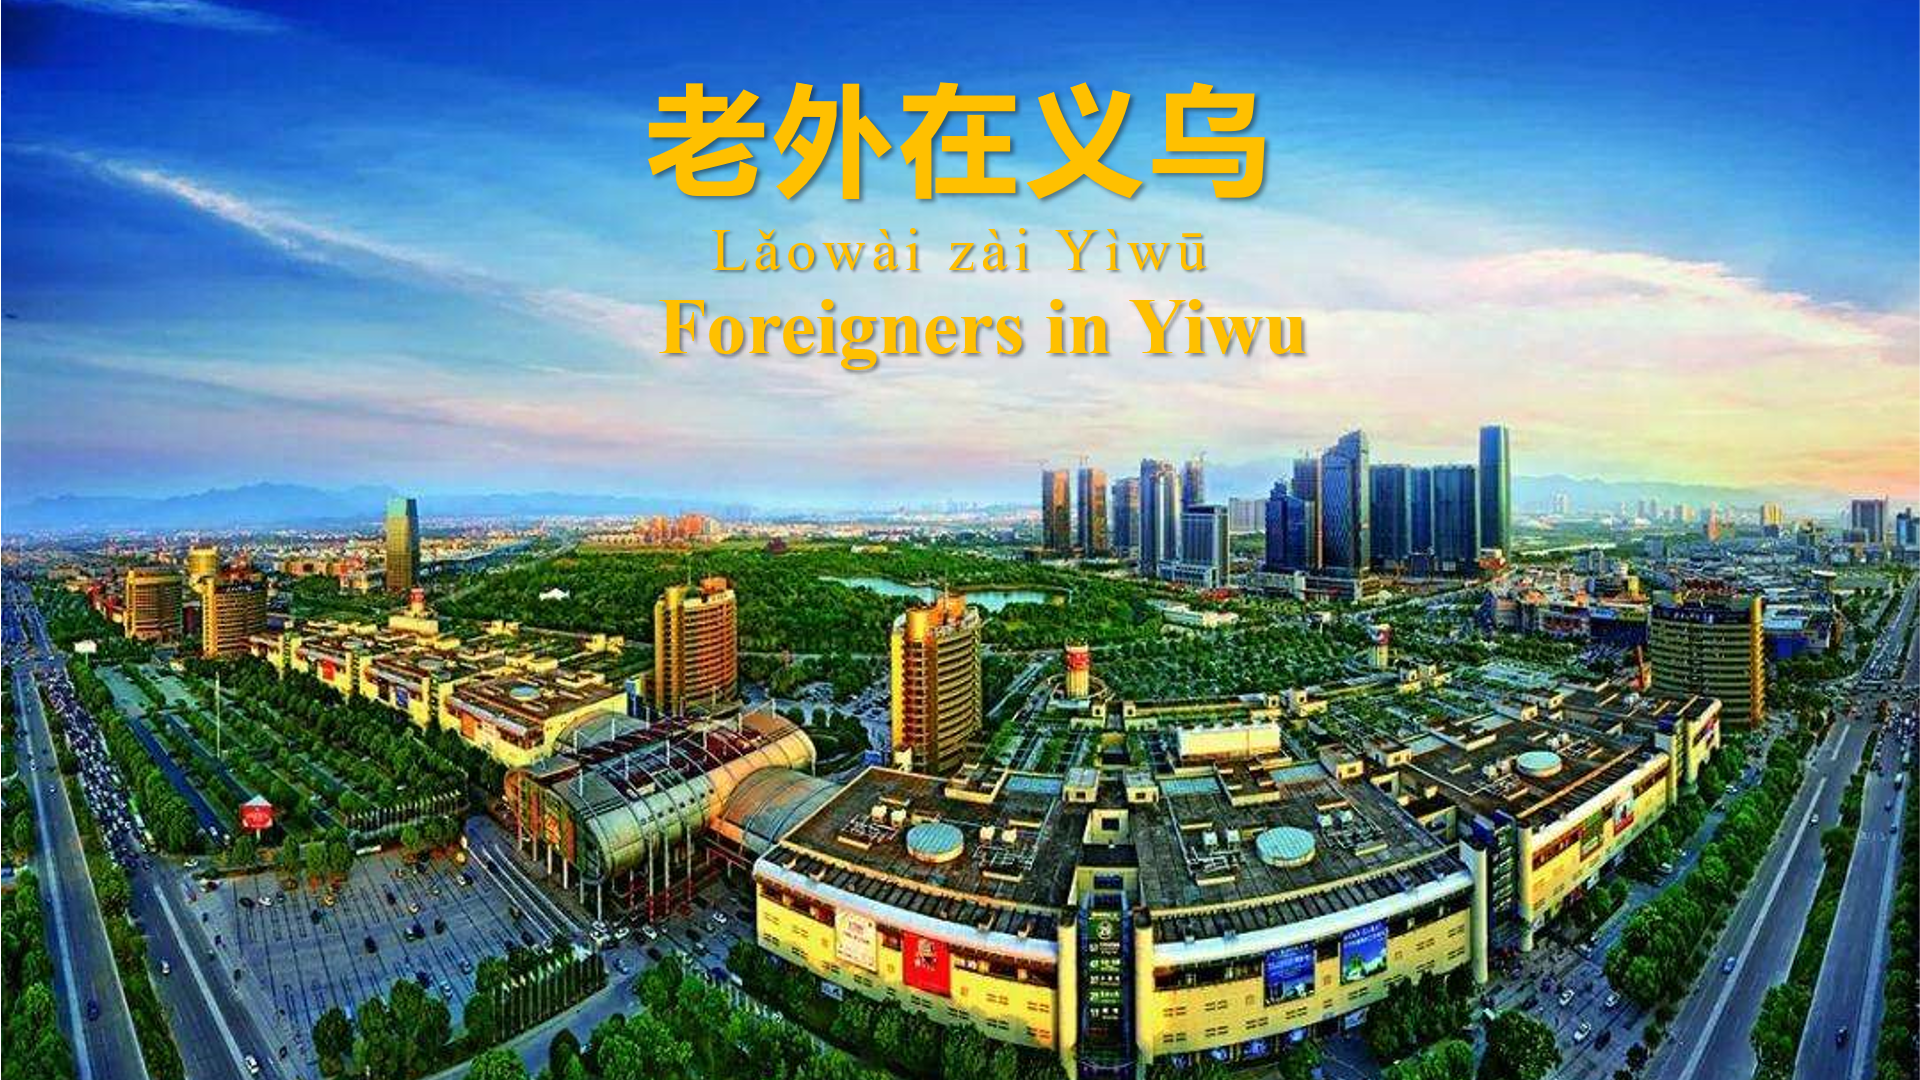 Foreigners in Yiwu